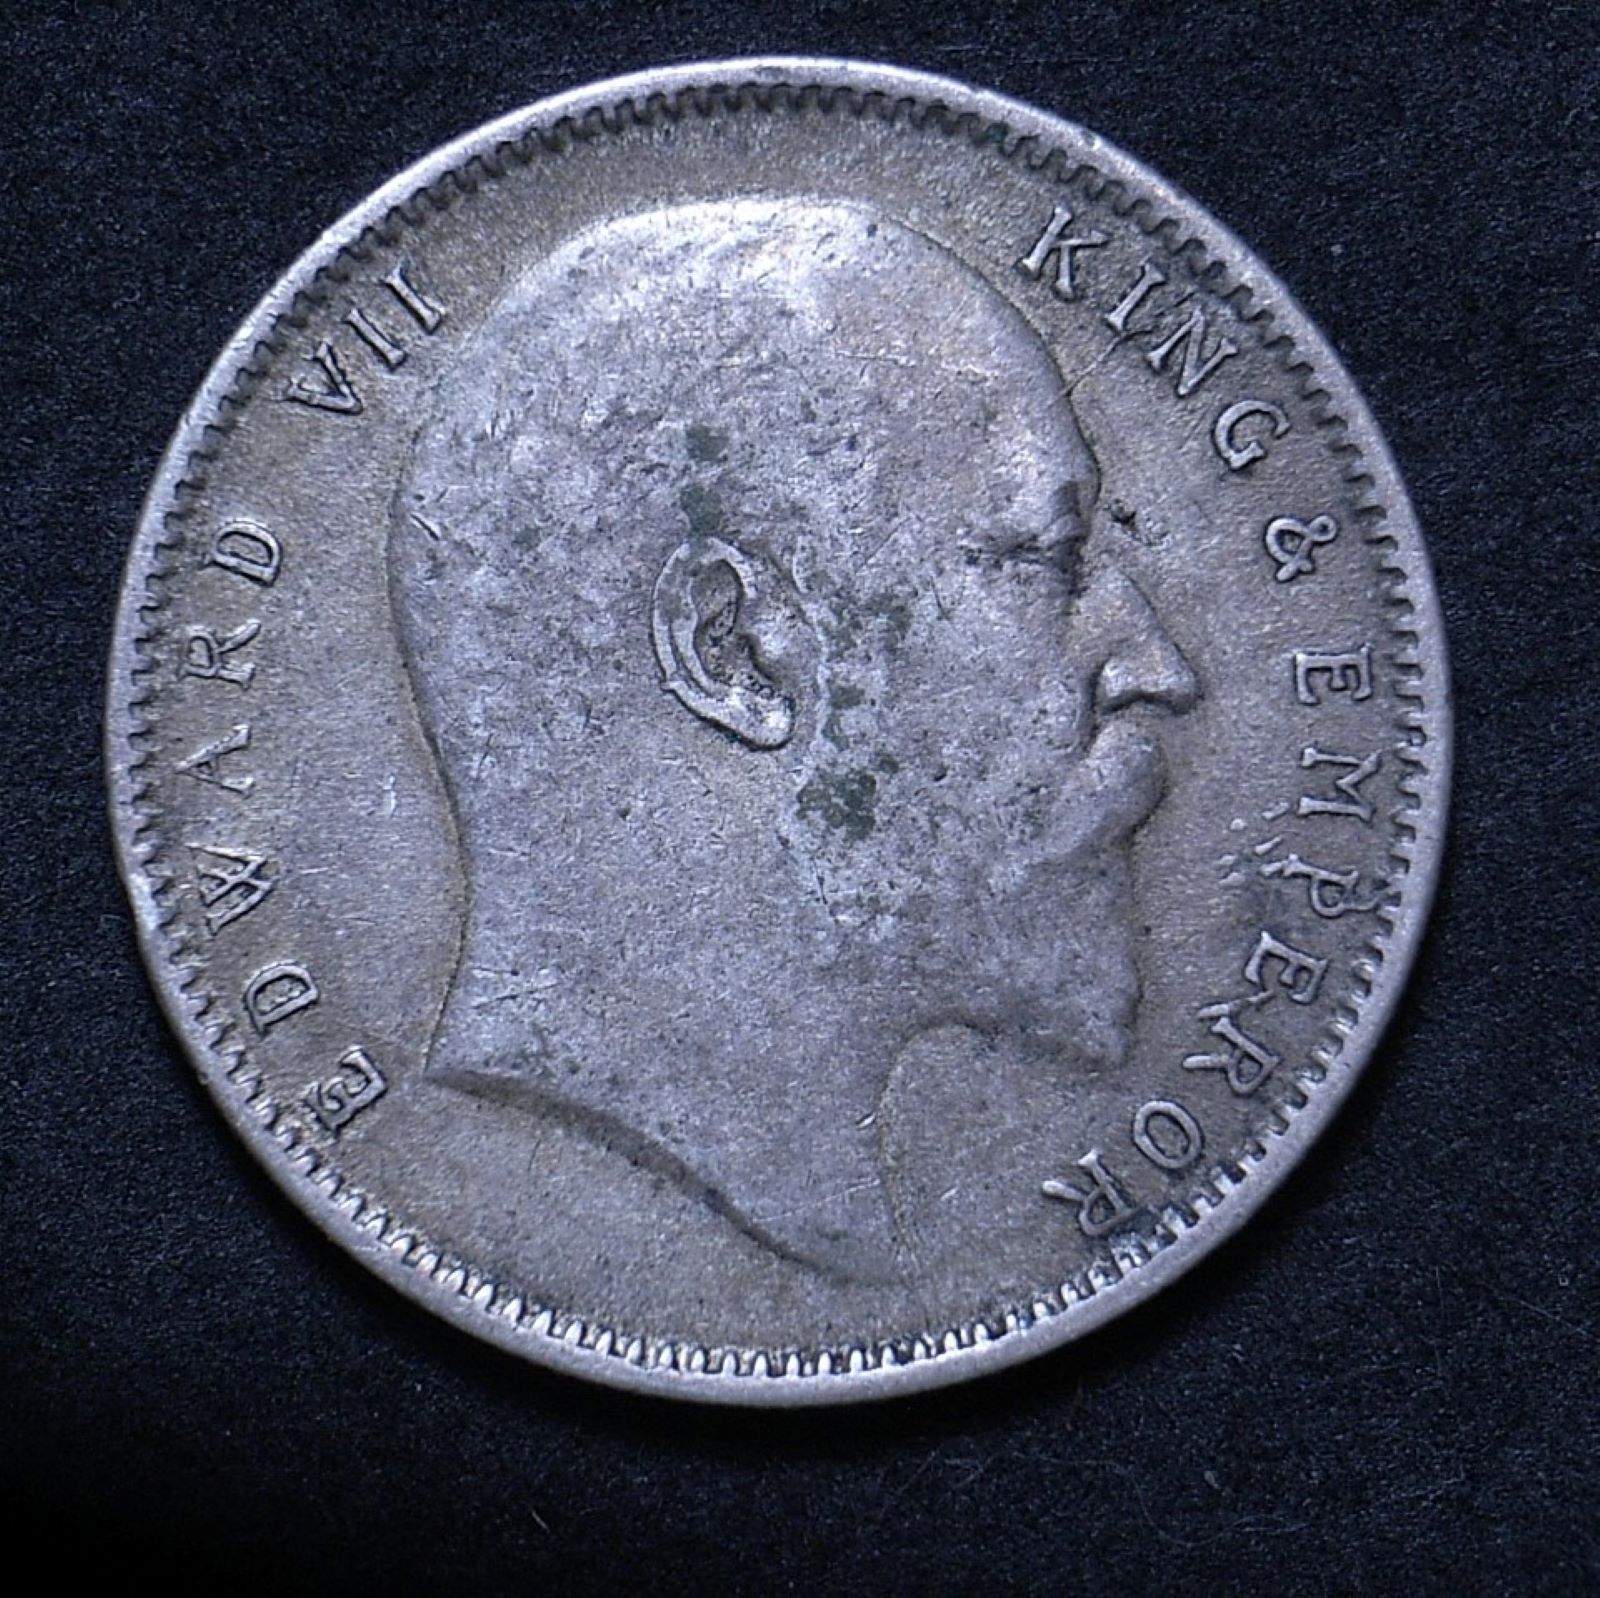 Close up of 1904 Indian rupee showing the coin's detail